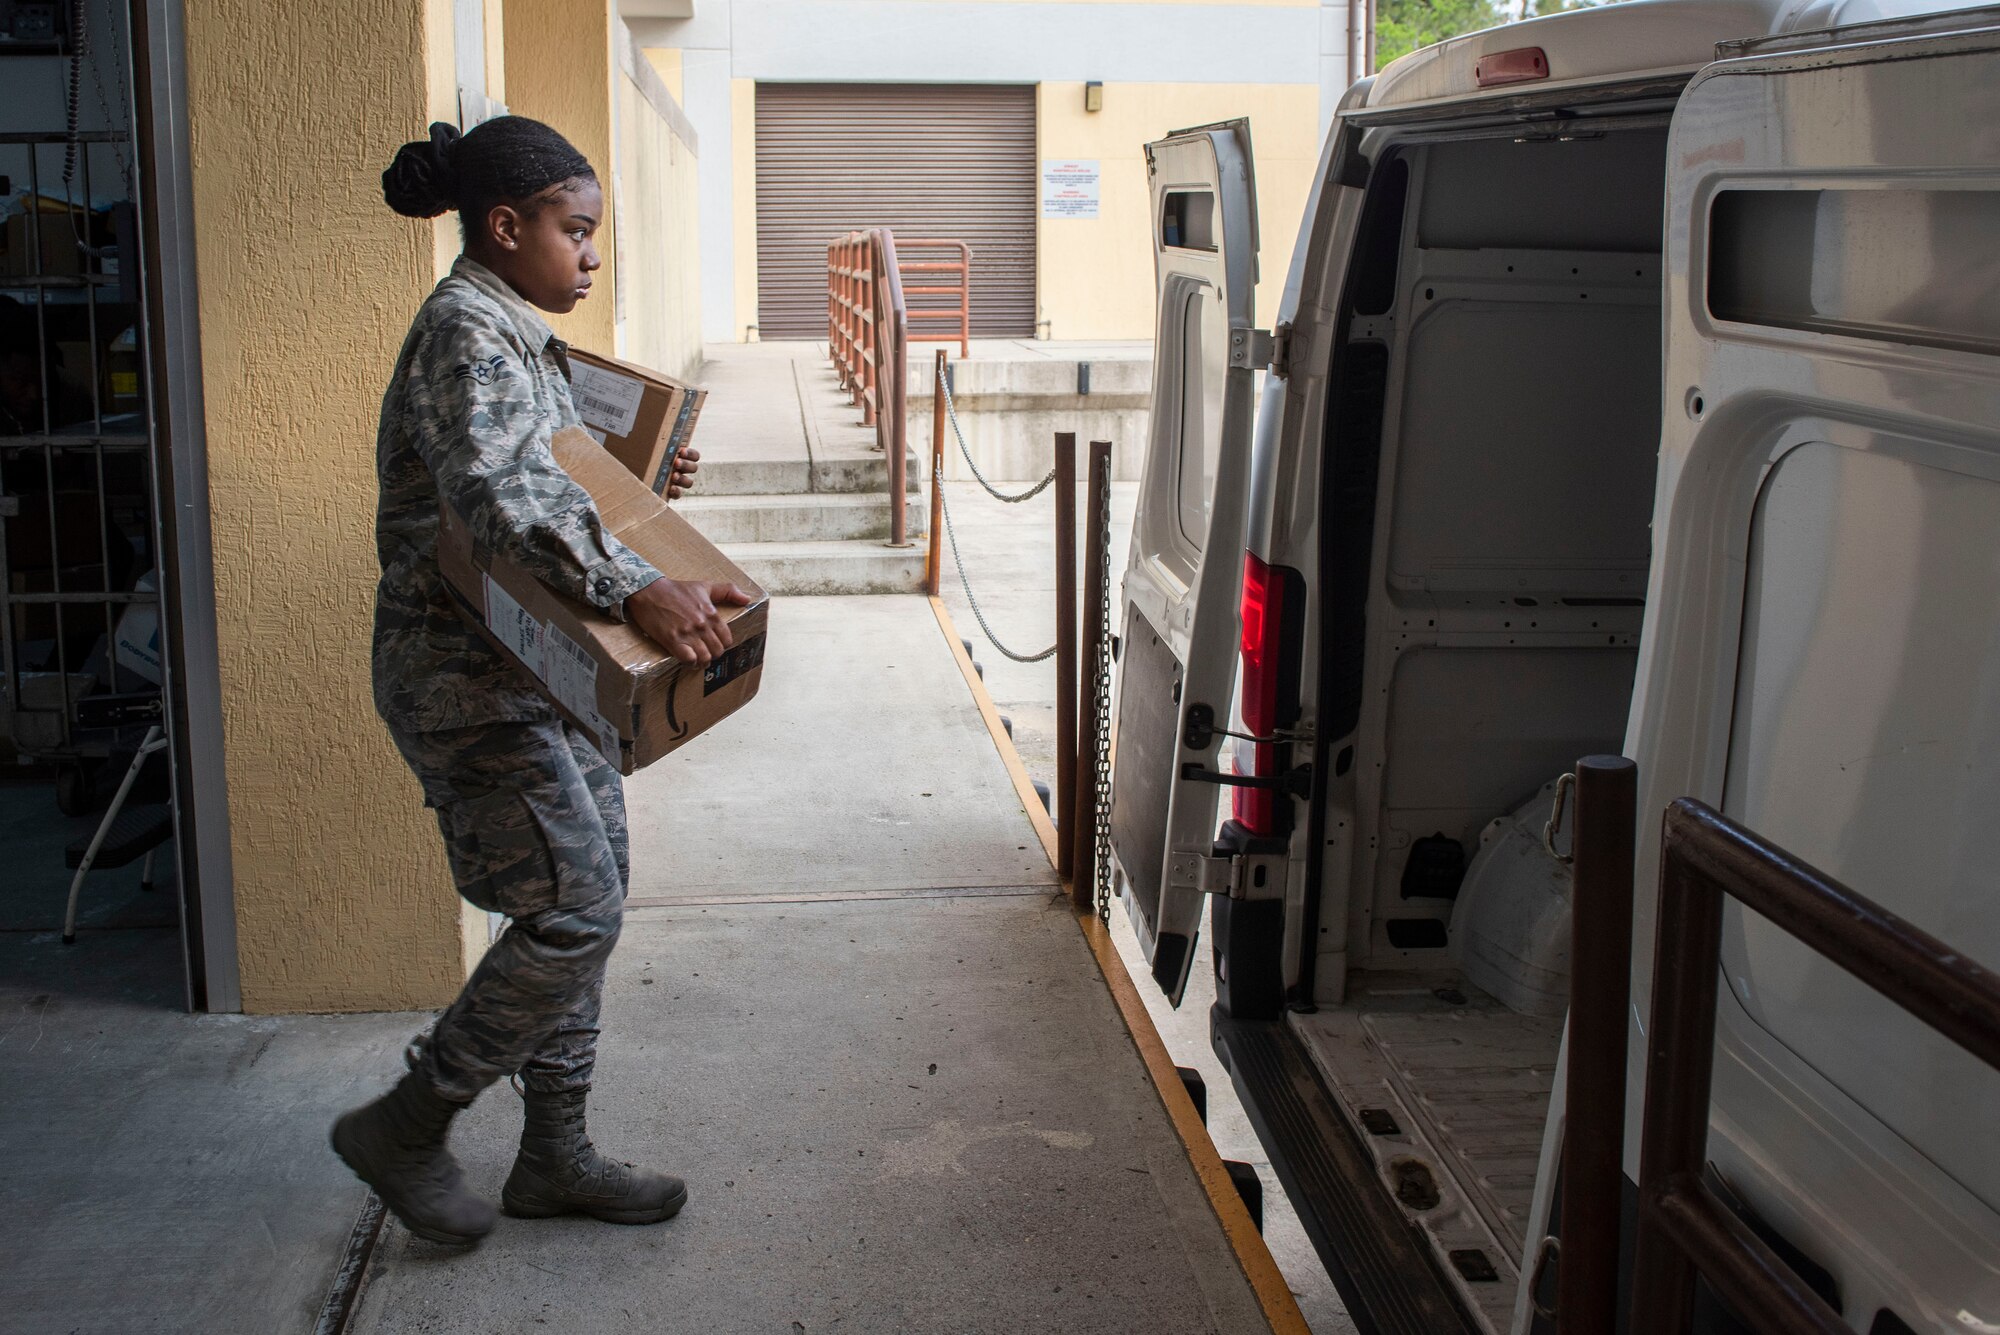 Photo of Airman loading mail into a van